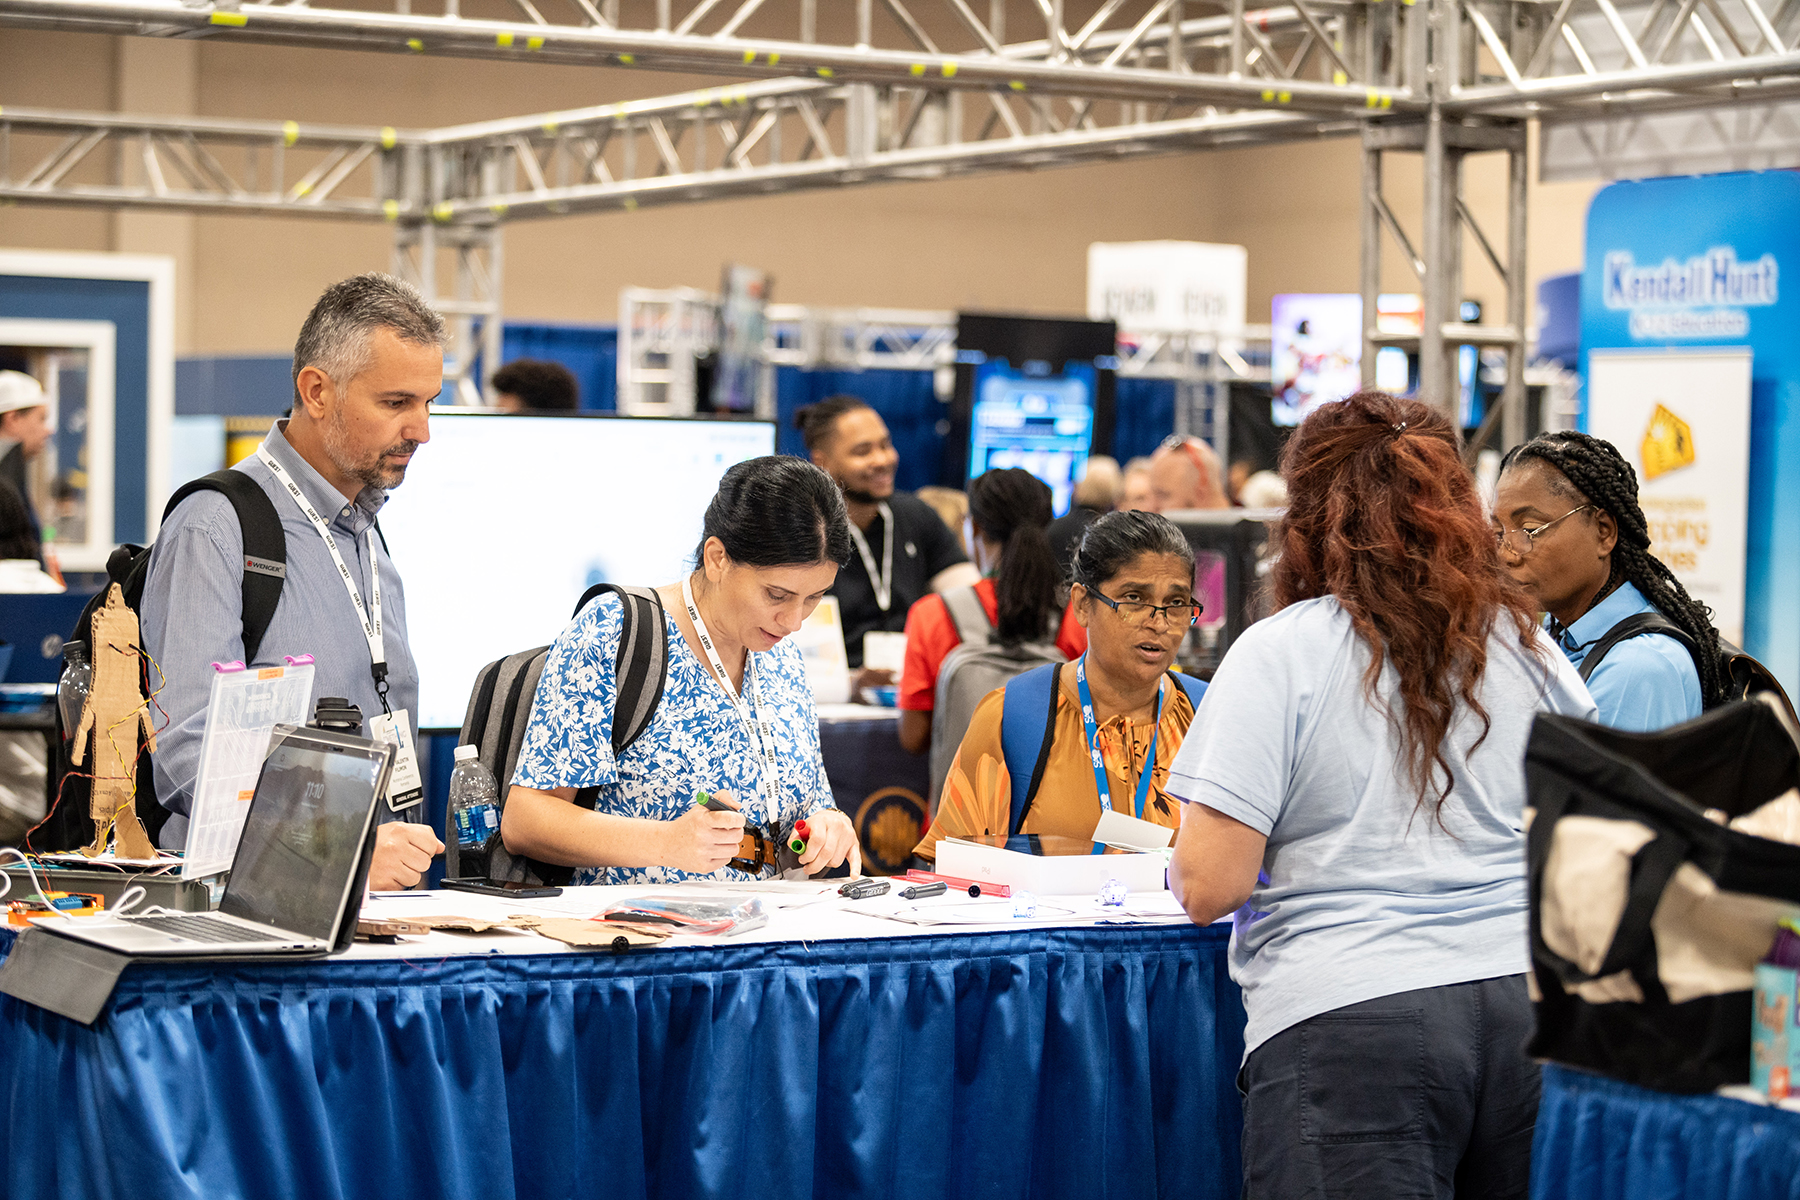 A woman behind a table speaks to three women and a man in a busy exhibit hall